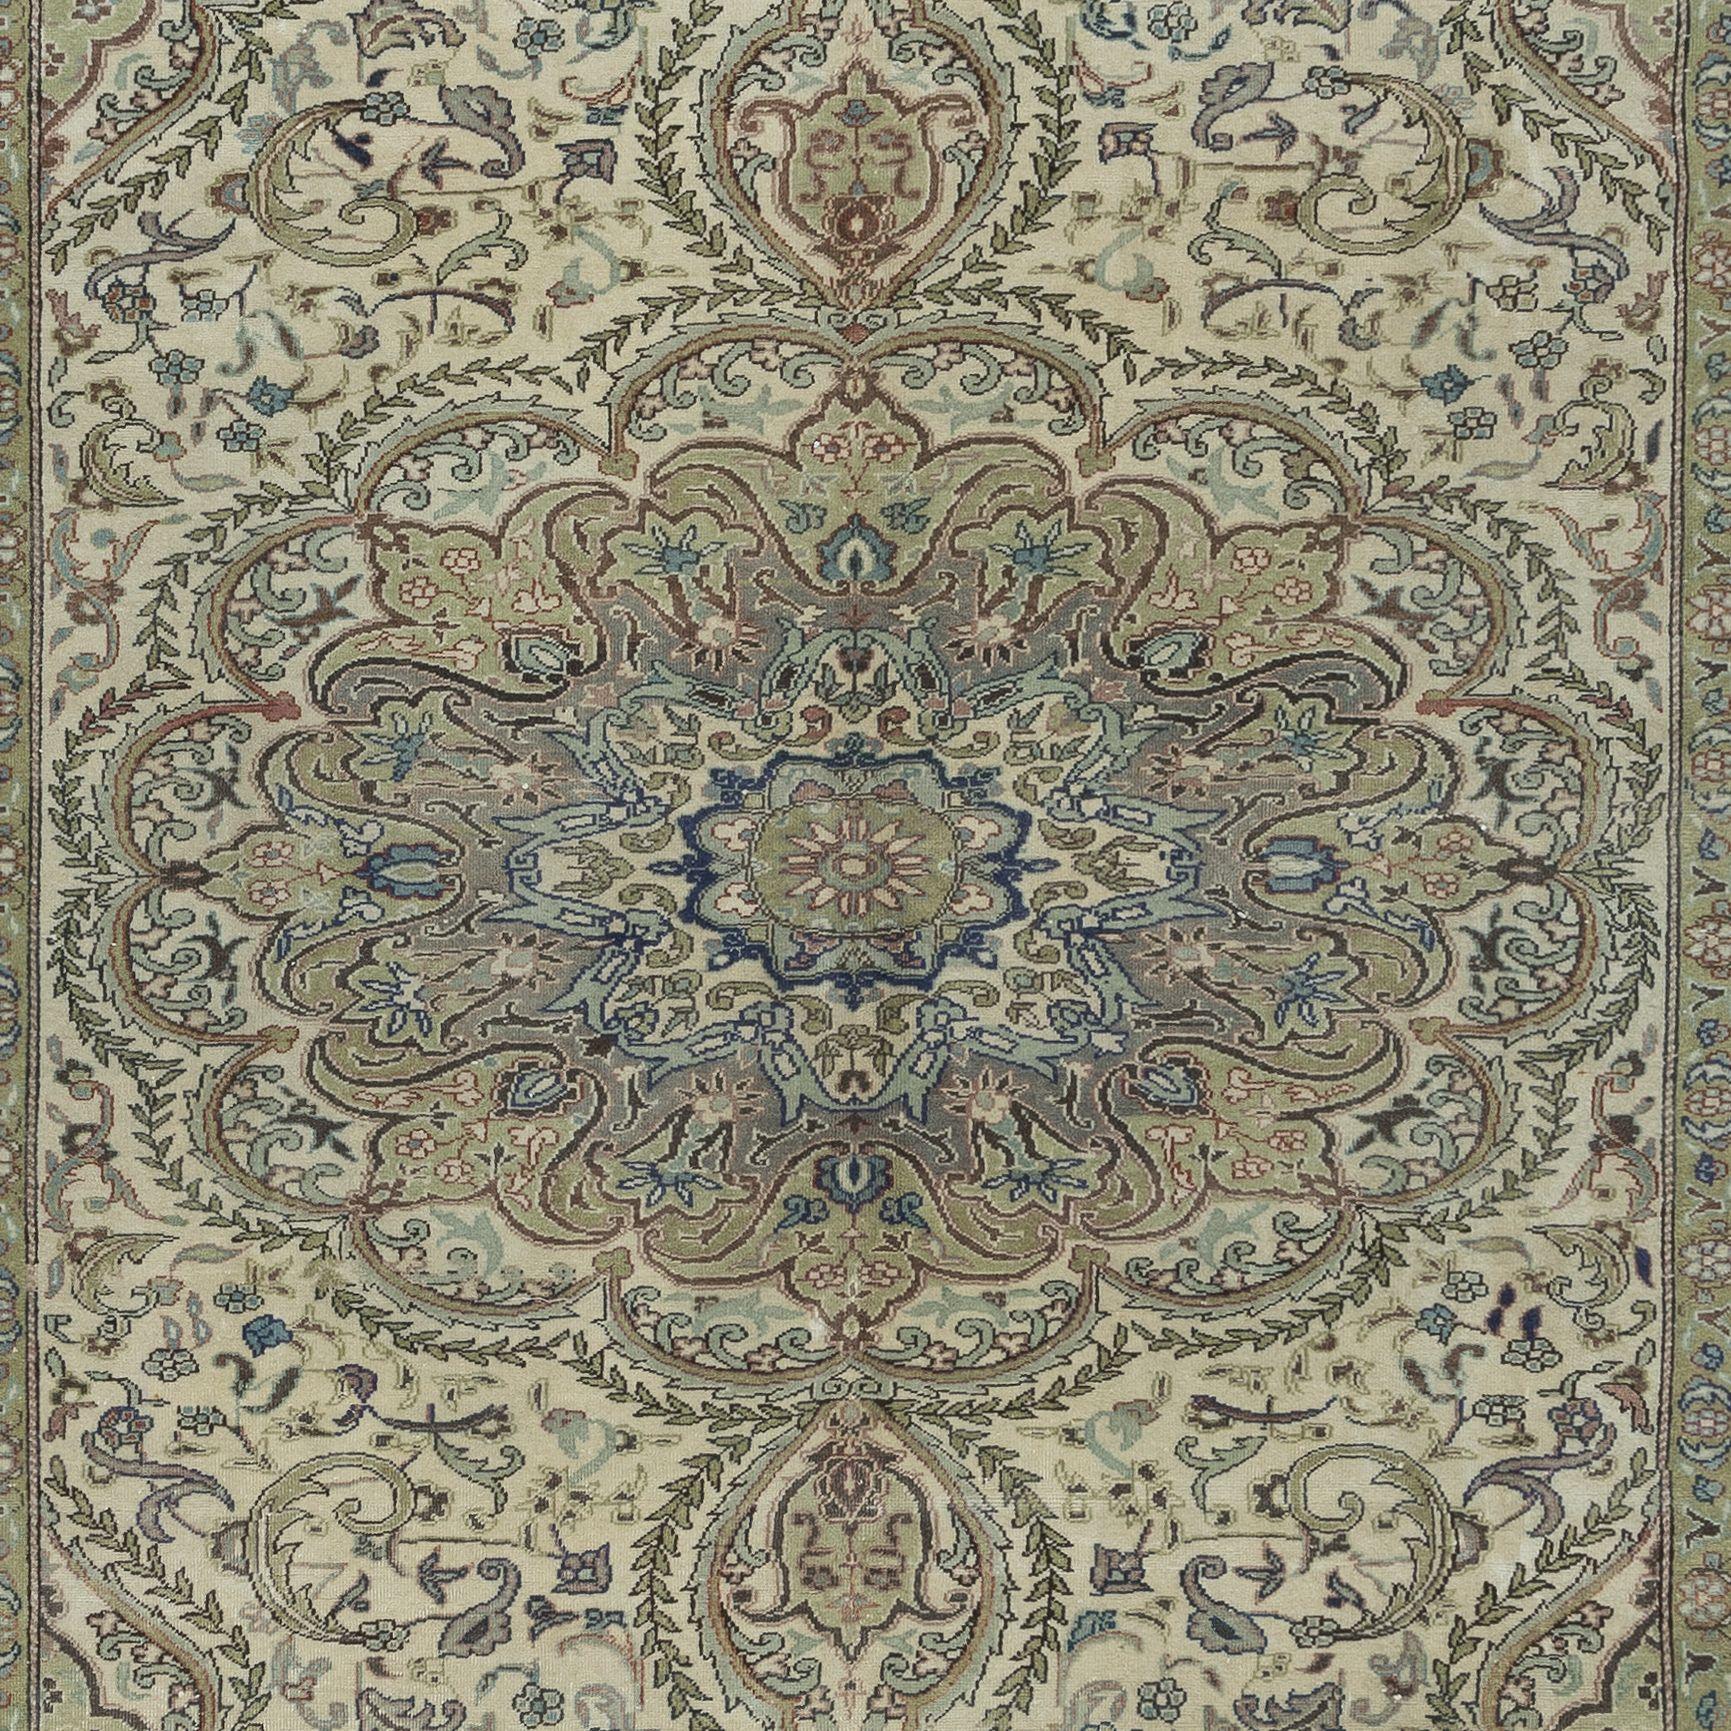 6.4x9.8 Ft Traditional Handmade Turkish Medallion Design Rug in Green Tones In Good Condition For Sale In Philadelphia, PA